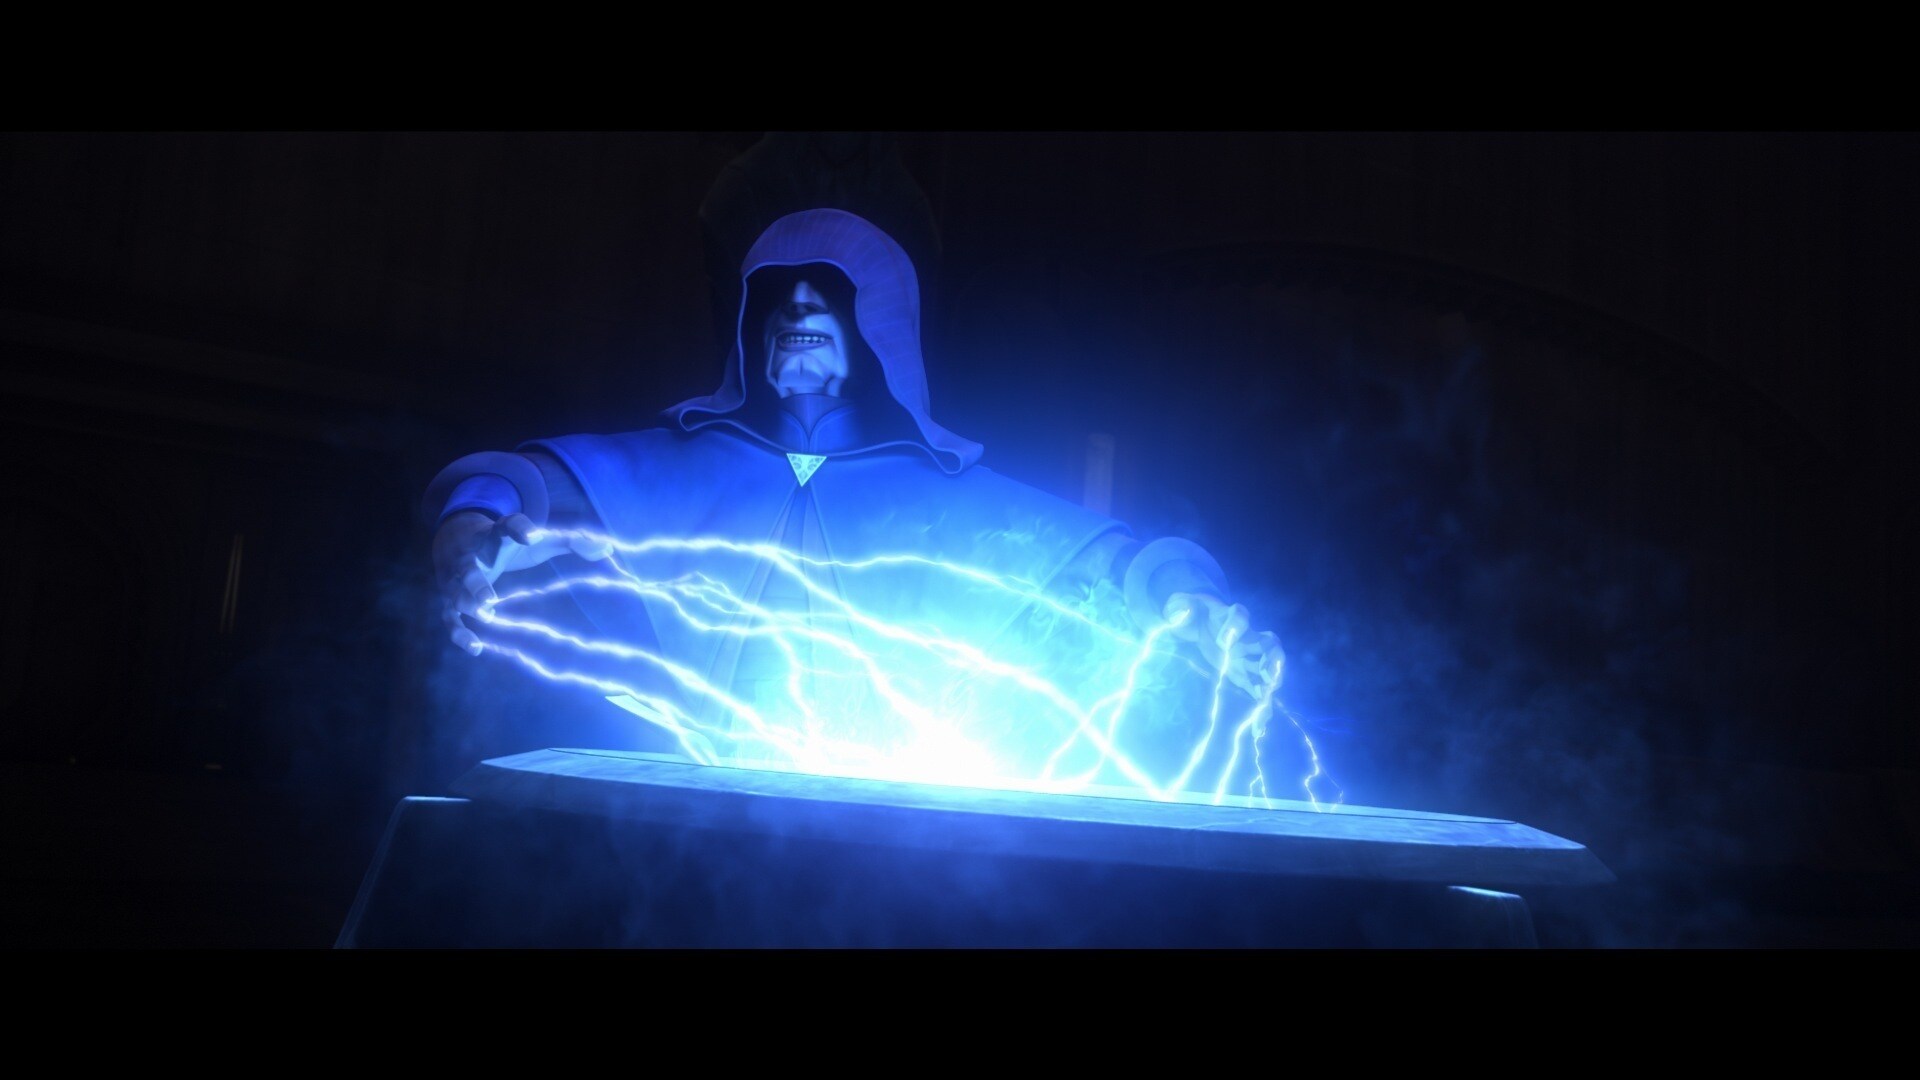 In the script, Sidious' incantation is said to be "Balc speech," and is written as follows: "Kint...